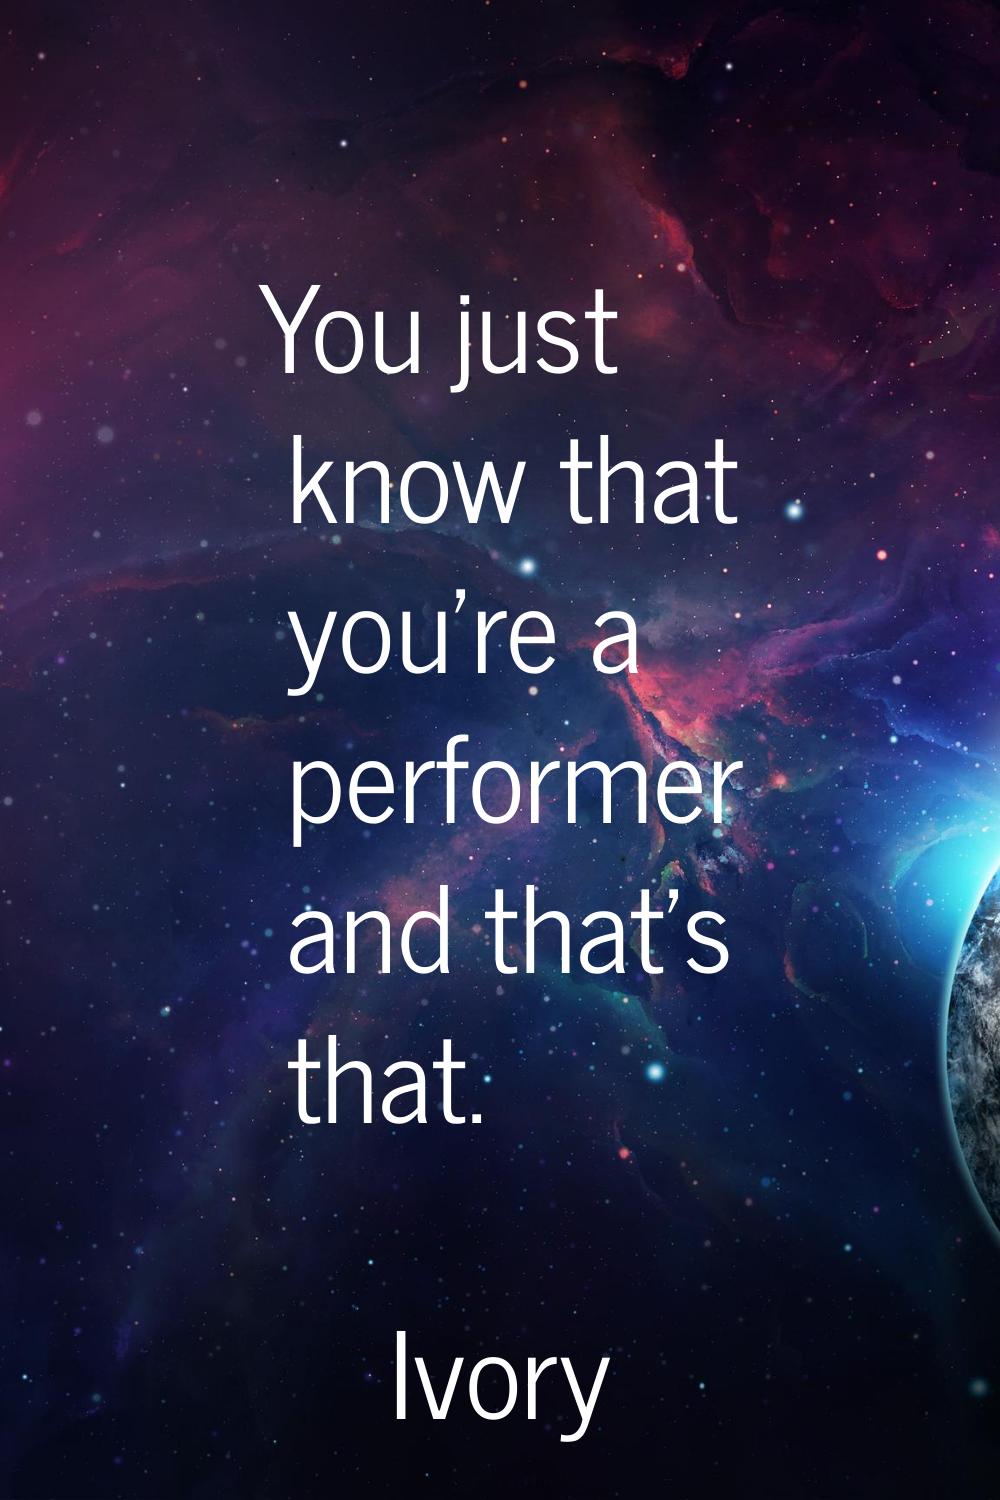 You just know that you're a performer and that's that.